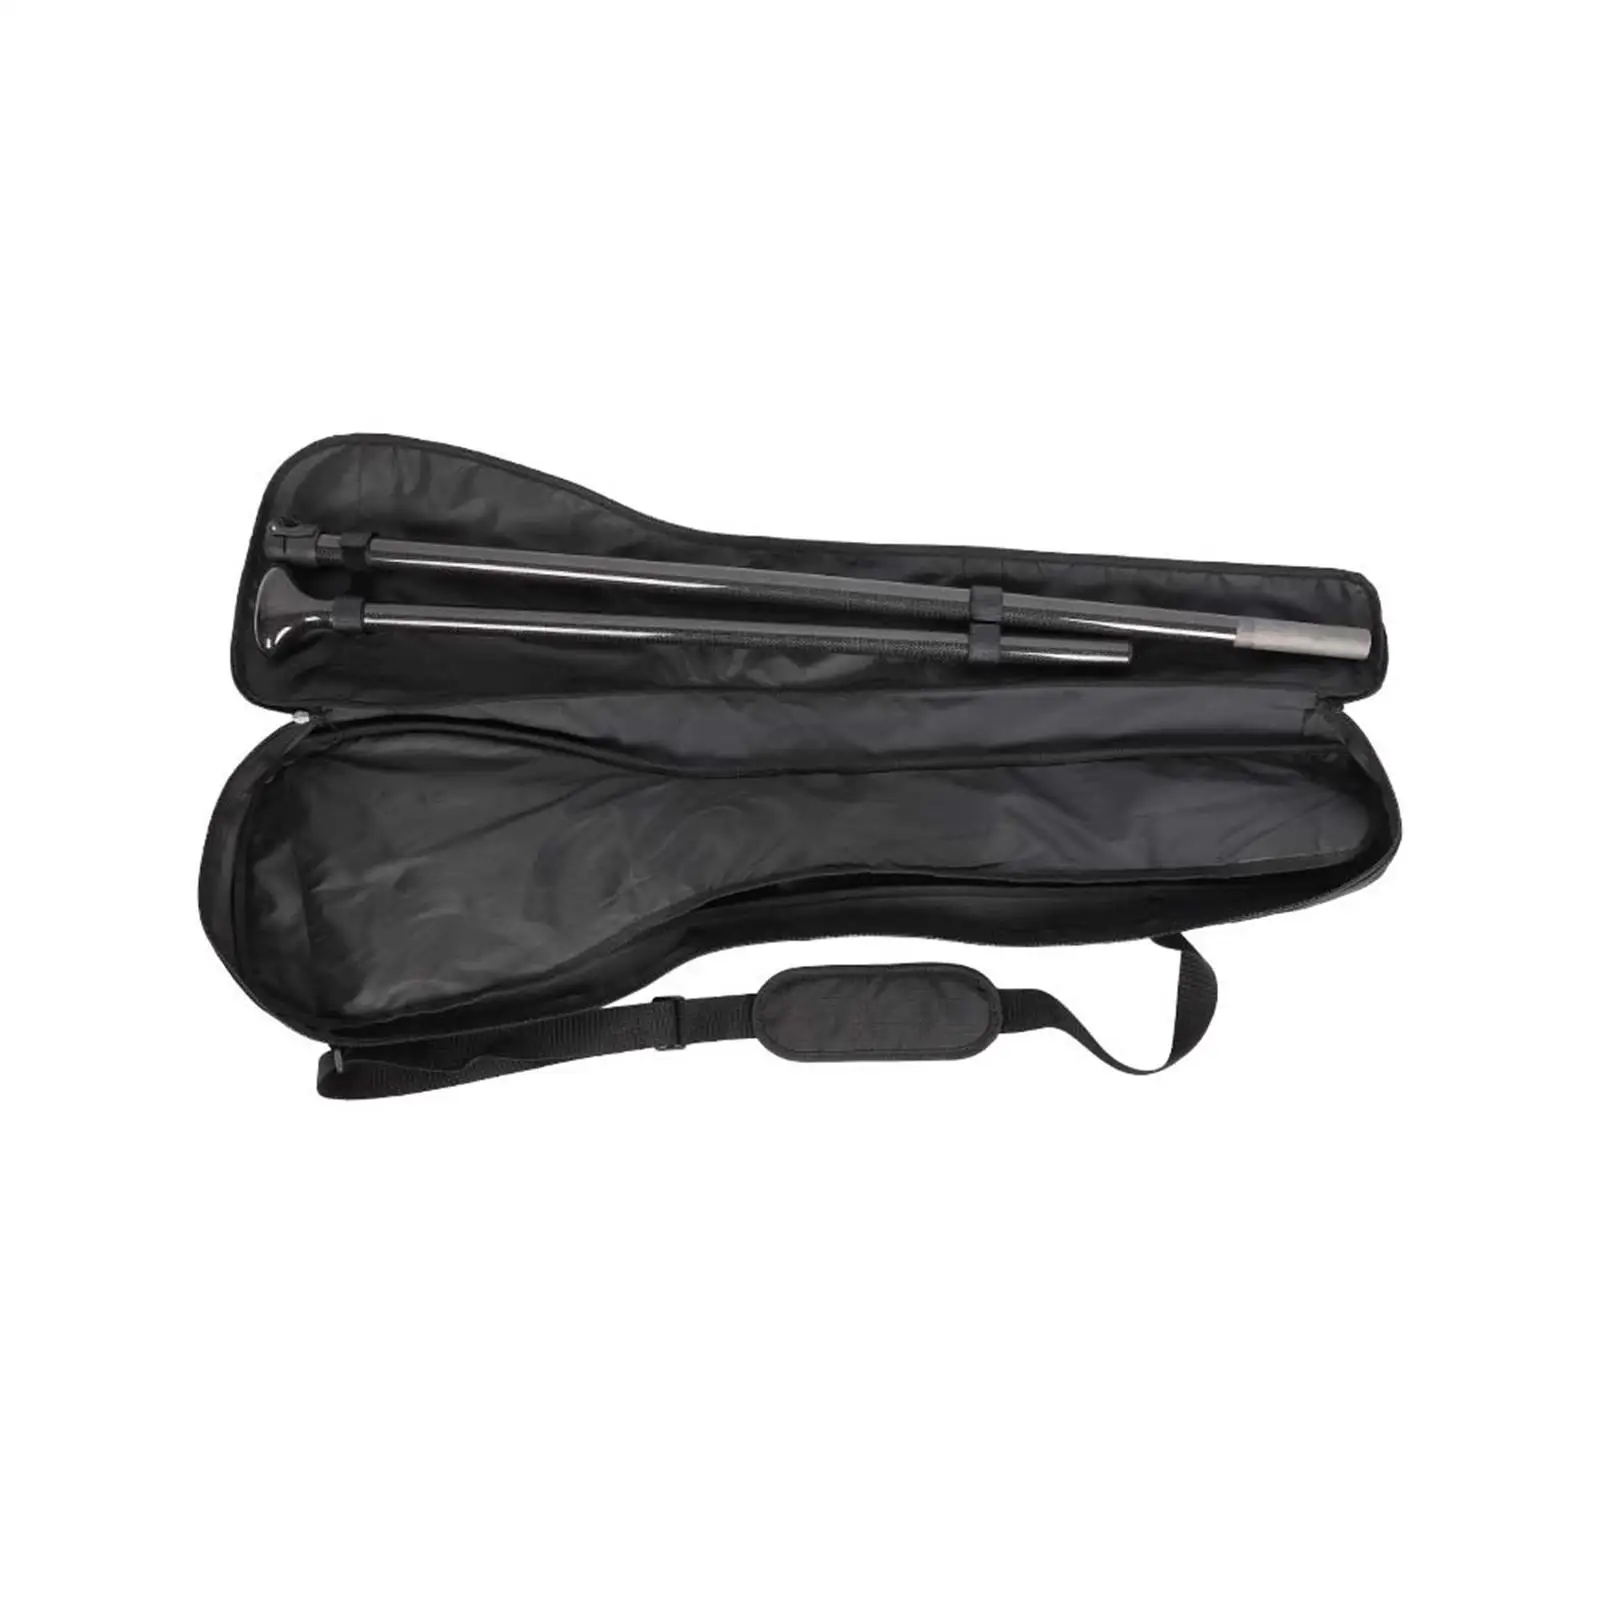 Kayak Paddle Carrying Bag for 3 Piece Split Paddle Length 96cm with Carry Handle, Removable Shoulder Strap Thick Durable Stylish